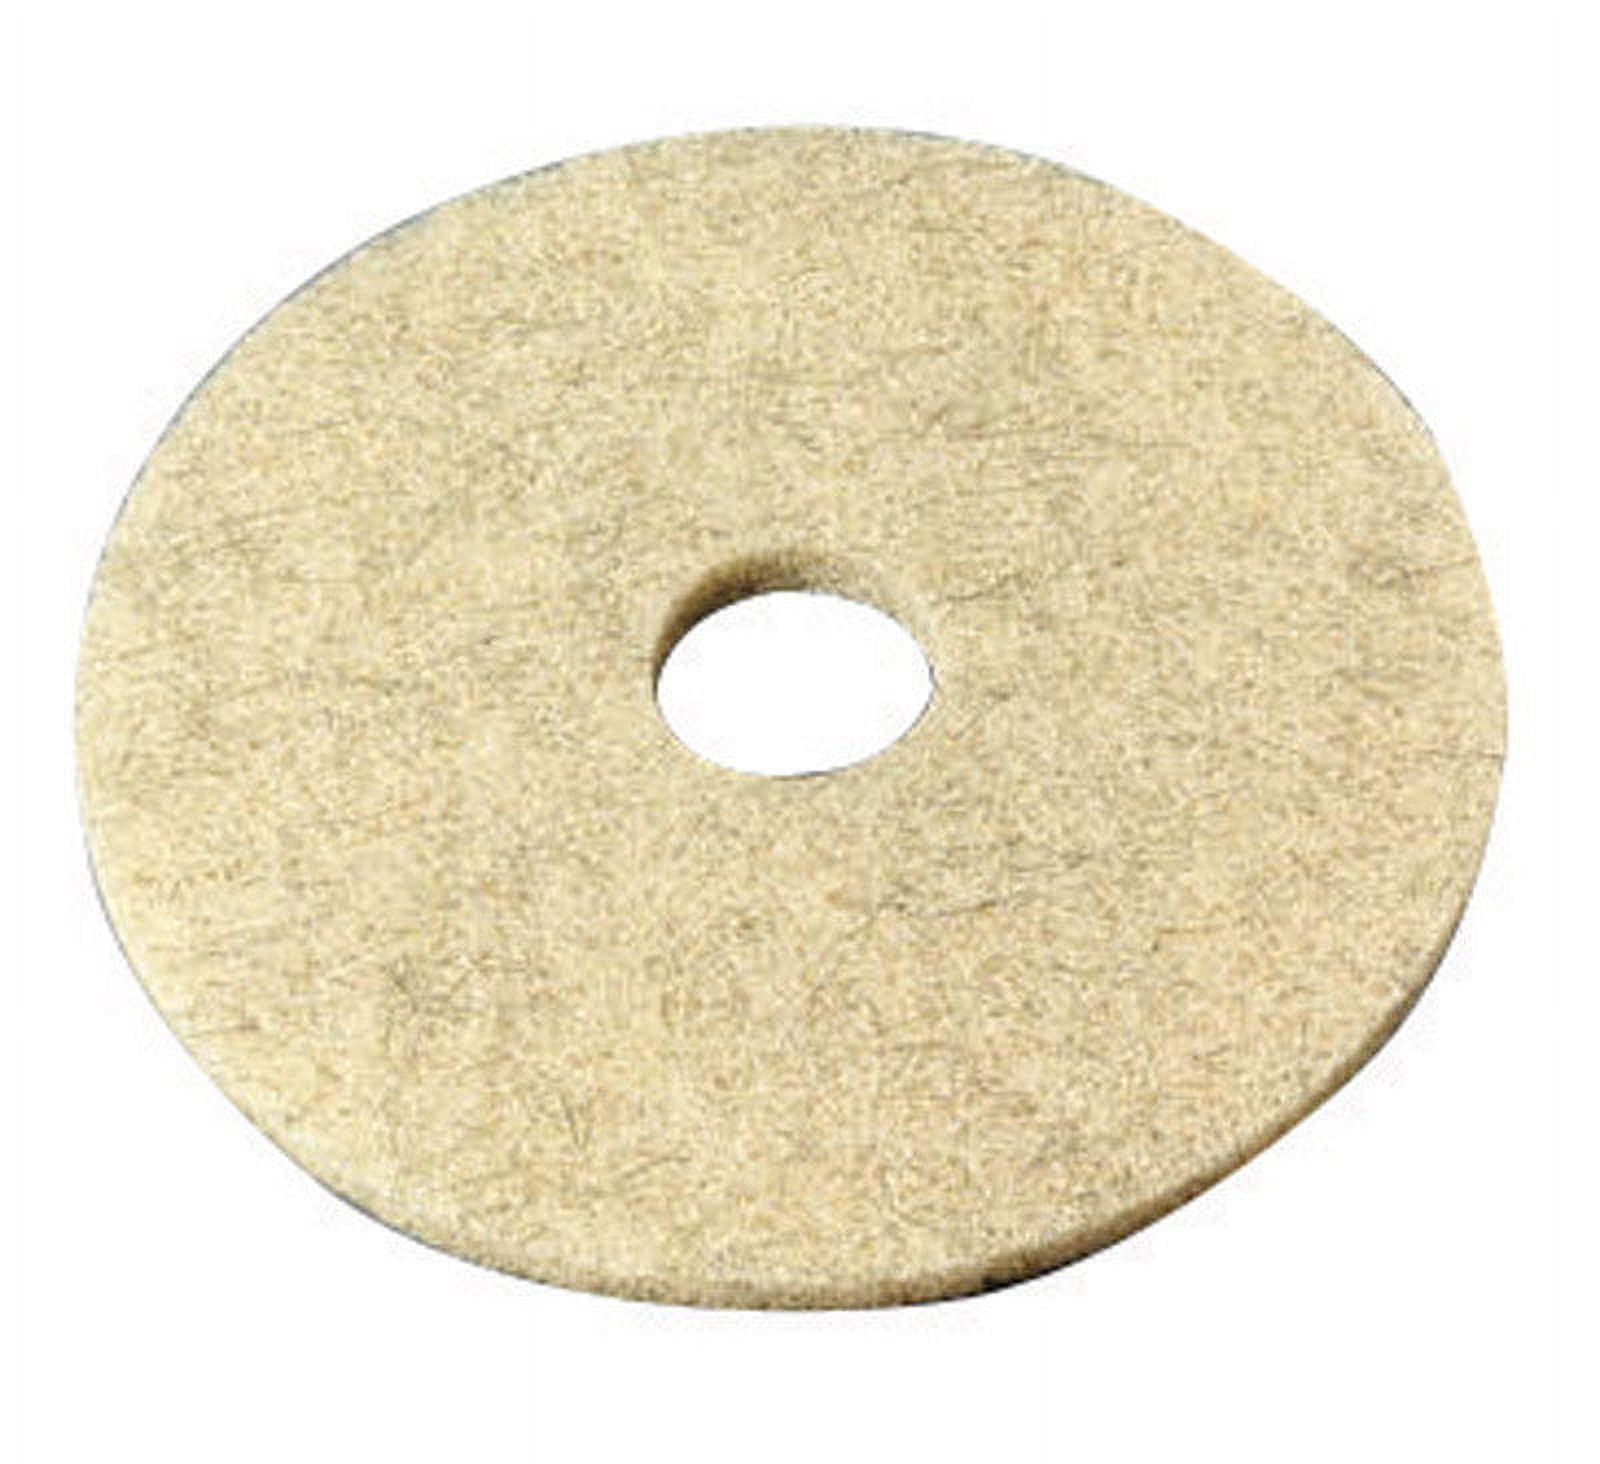 Picture of 3M 3500-20 20 in. Natural Blend Pad  Tan- pack of 5